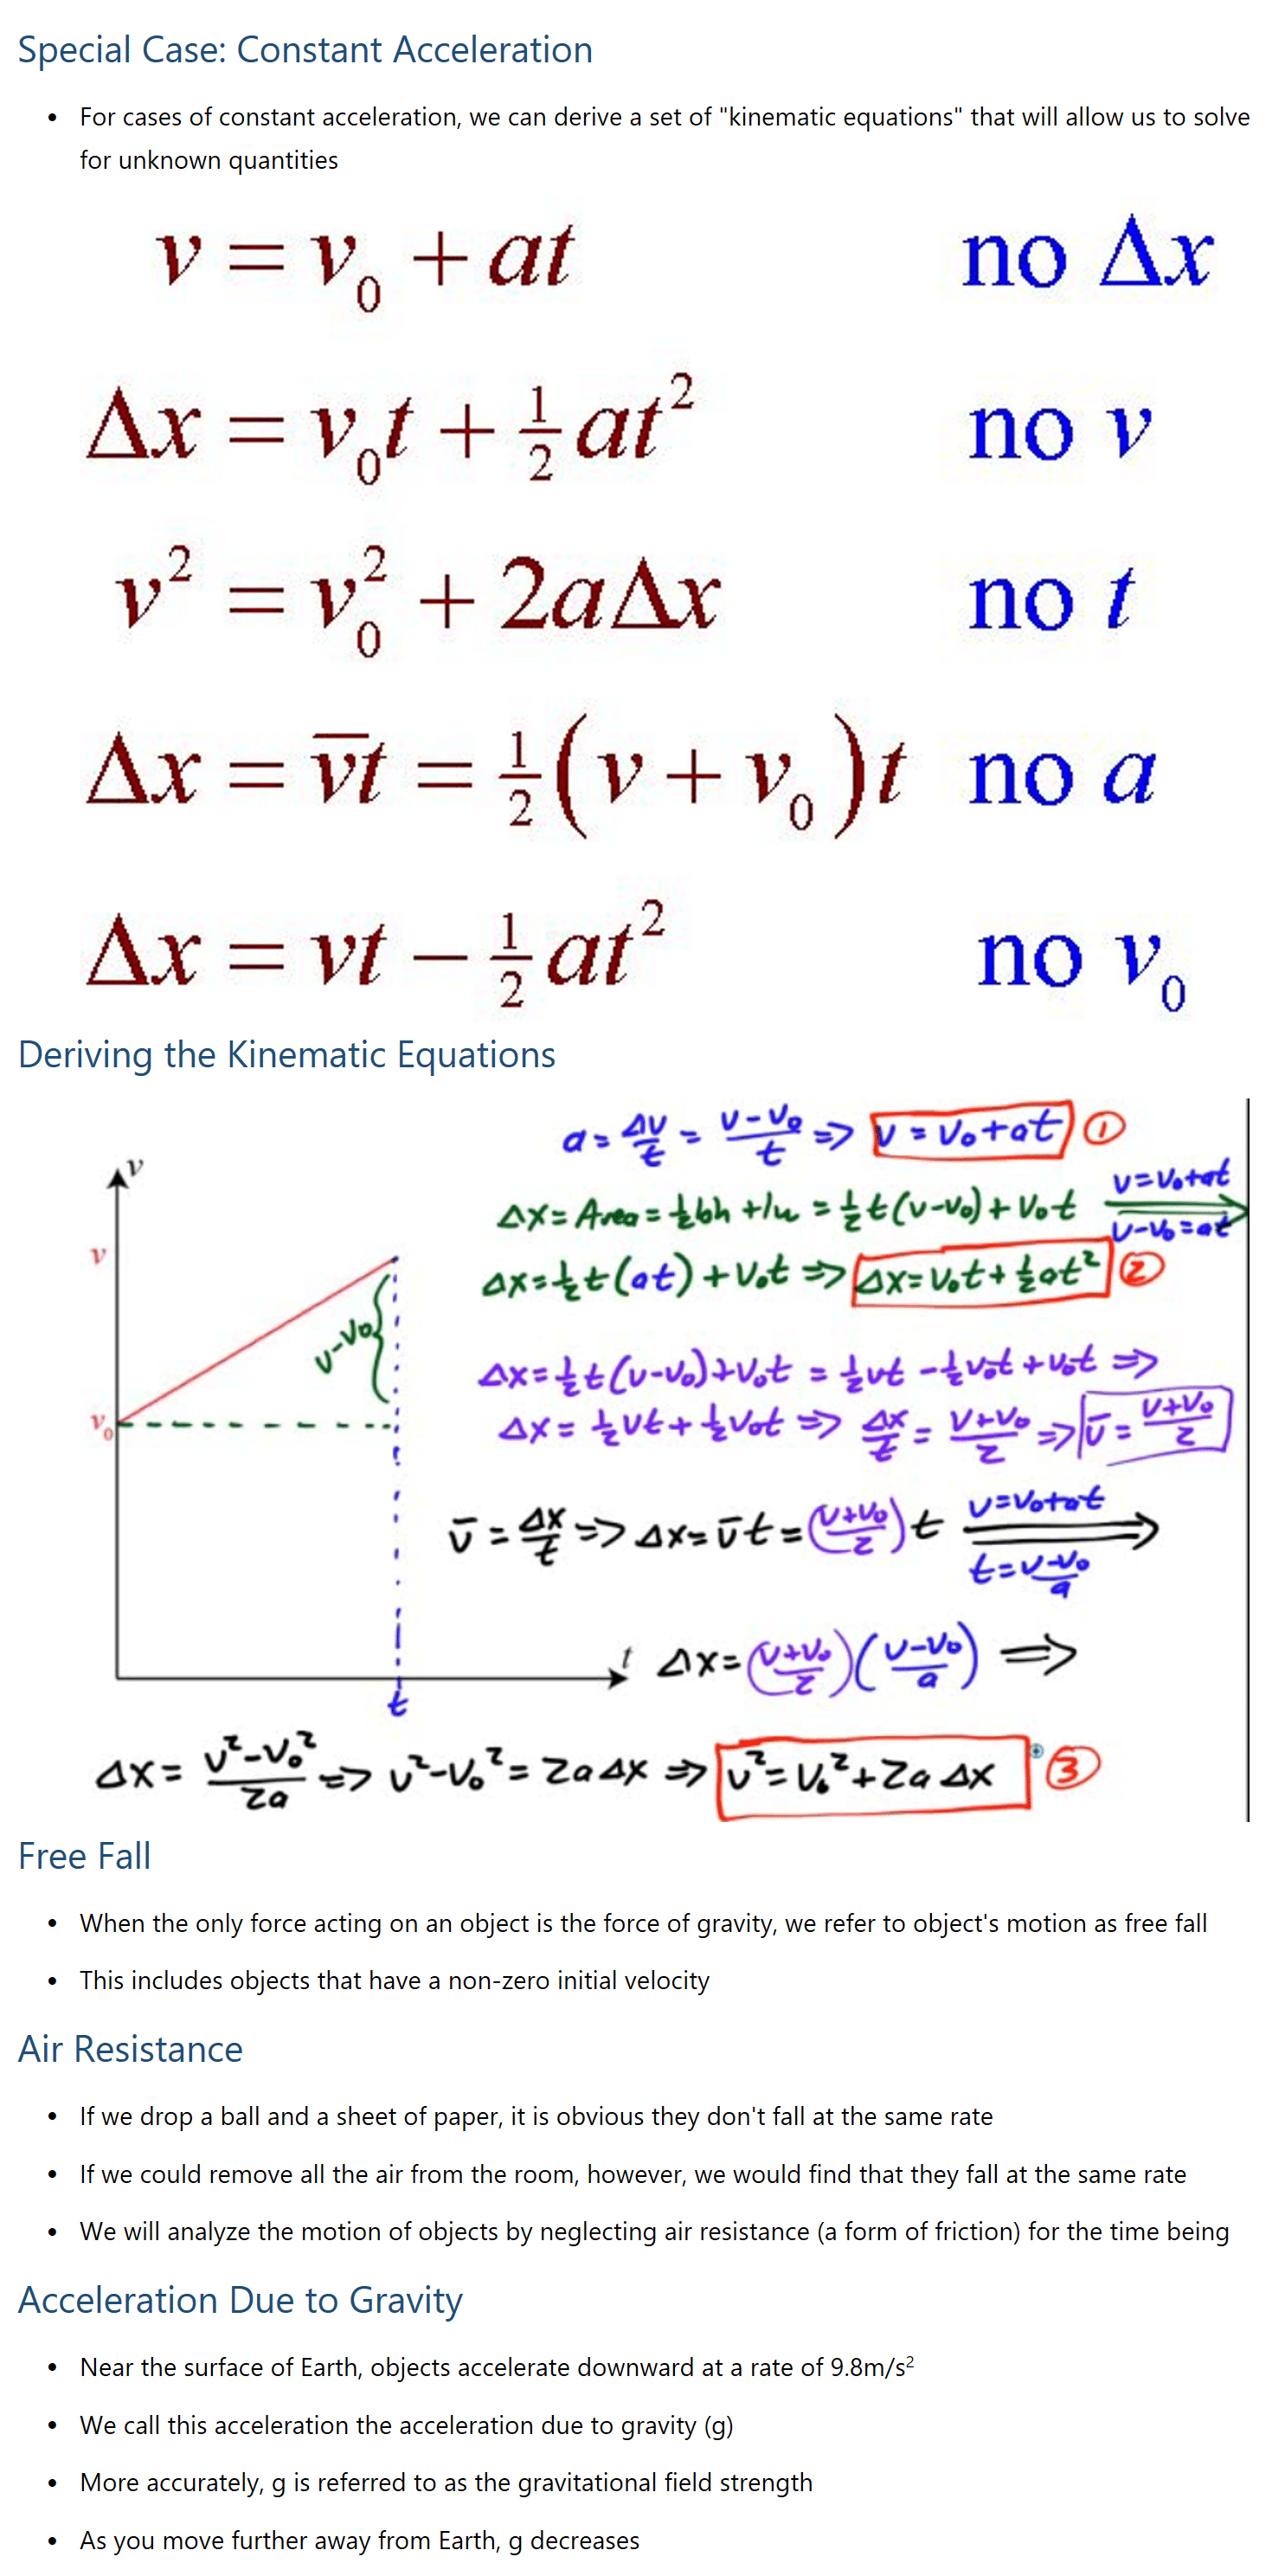 Special Case: Constant Acceleration • For cases of constant acceleration, we can derive a set of "kinematic equations" that will allow us to solve for unknown quantities Deriving the Kinematic Equations Free Fall • When the only force acting on an object is the force of gravity, we refer to object